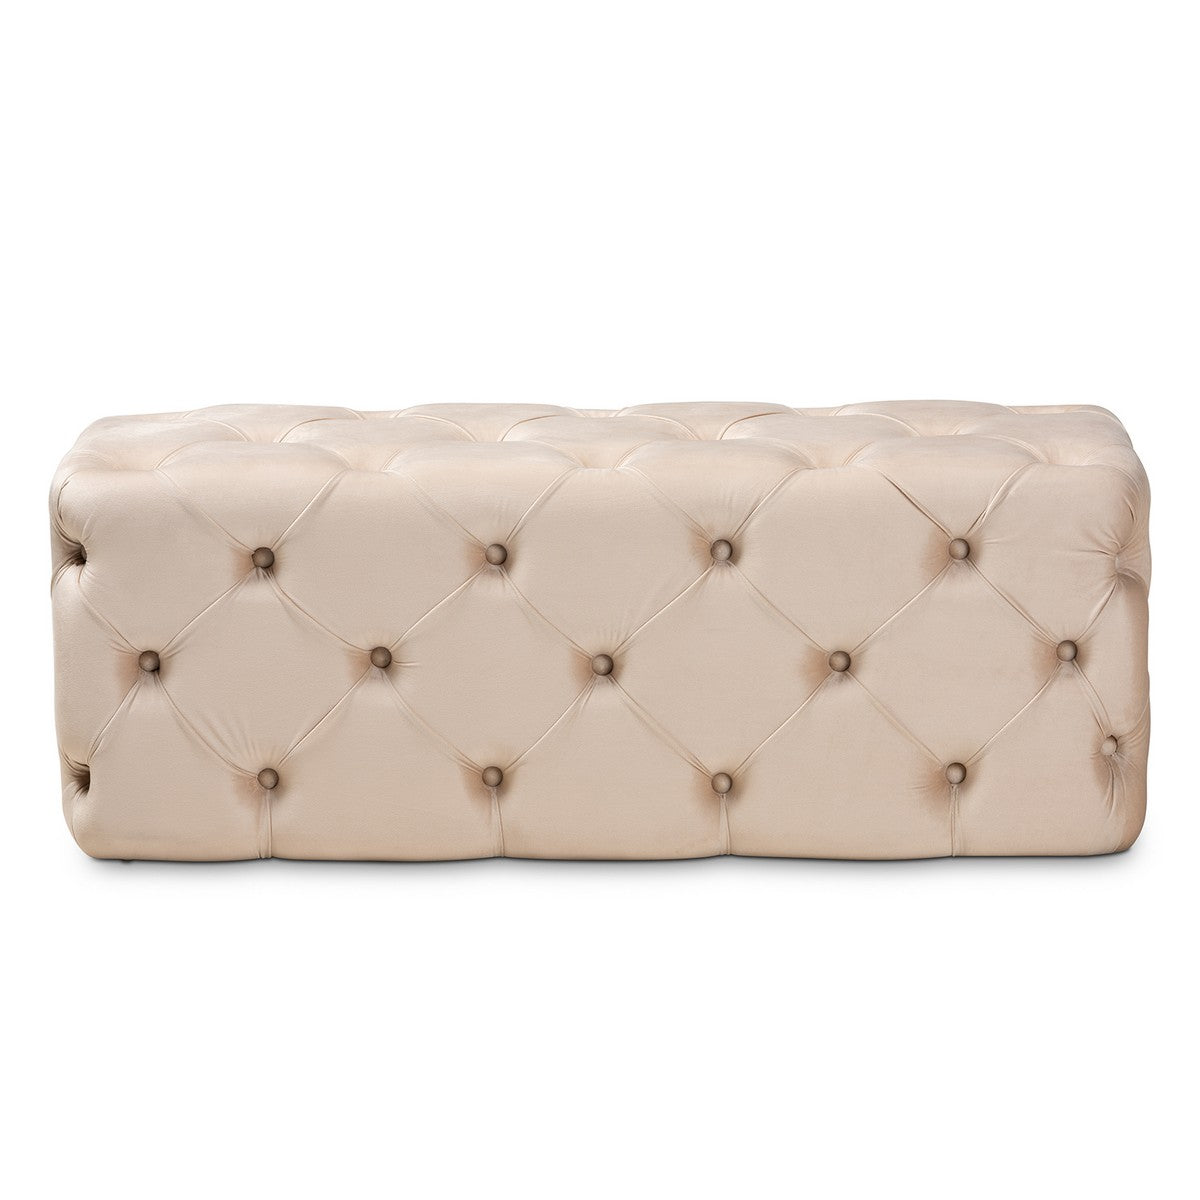 Baxton Studio Jasmine Modern Contemporary Glam and Luxe Beige Velvet Fabric Upholstered Button Tufted Bench Ottoman